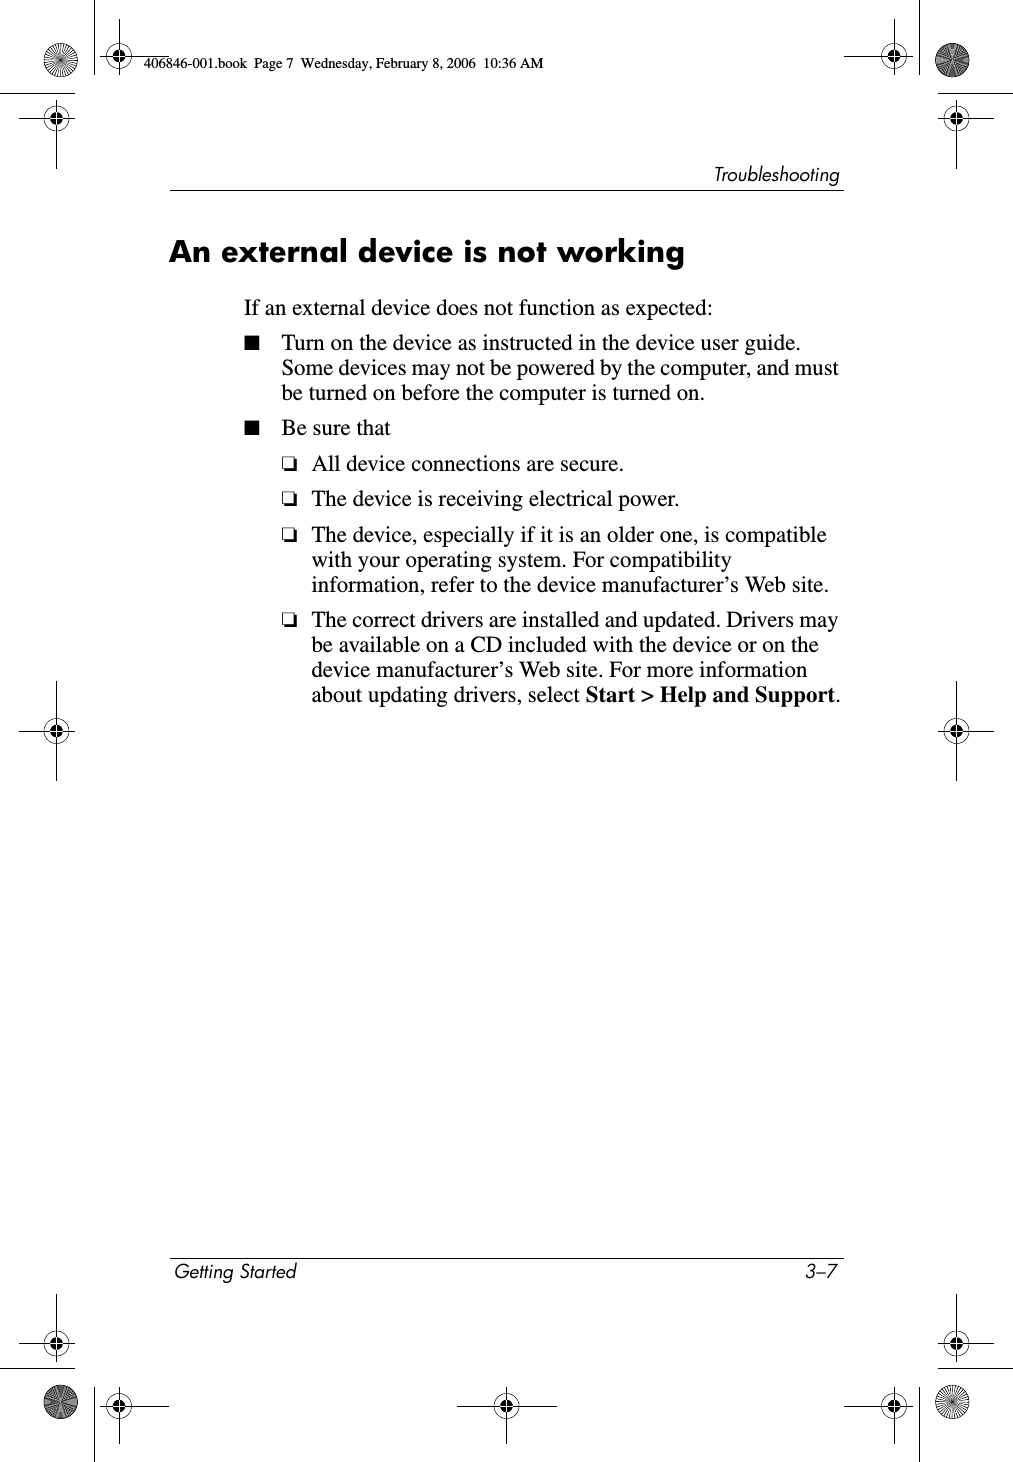 TroubleshootingGetting Started 3–7An external device is not workingIf an external device does not function as expected:■Turn on the device as instructed in the device user guide. Some devices may not be powered by the computer, and must be turned on before the computer is turned on.■Be sure that❏All device connections are secure.❏The device is receiving electrical power.❏The device, especially if it is an older one, is compatible with your operating system. For compatibility information, refer to the device manufacturer’s Web site.❏The correct drivers are installed and updated. Drivers may be available on a CD included with the device or on the device manufacturer’s Web site. For more information about updating drivers, select Start &gt; Help and Support.406846-001.book  Page 7  Wednesday, February 8, 2006  10:36 AM